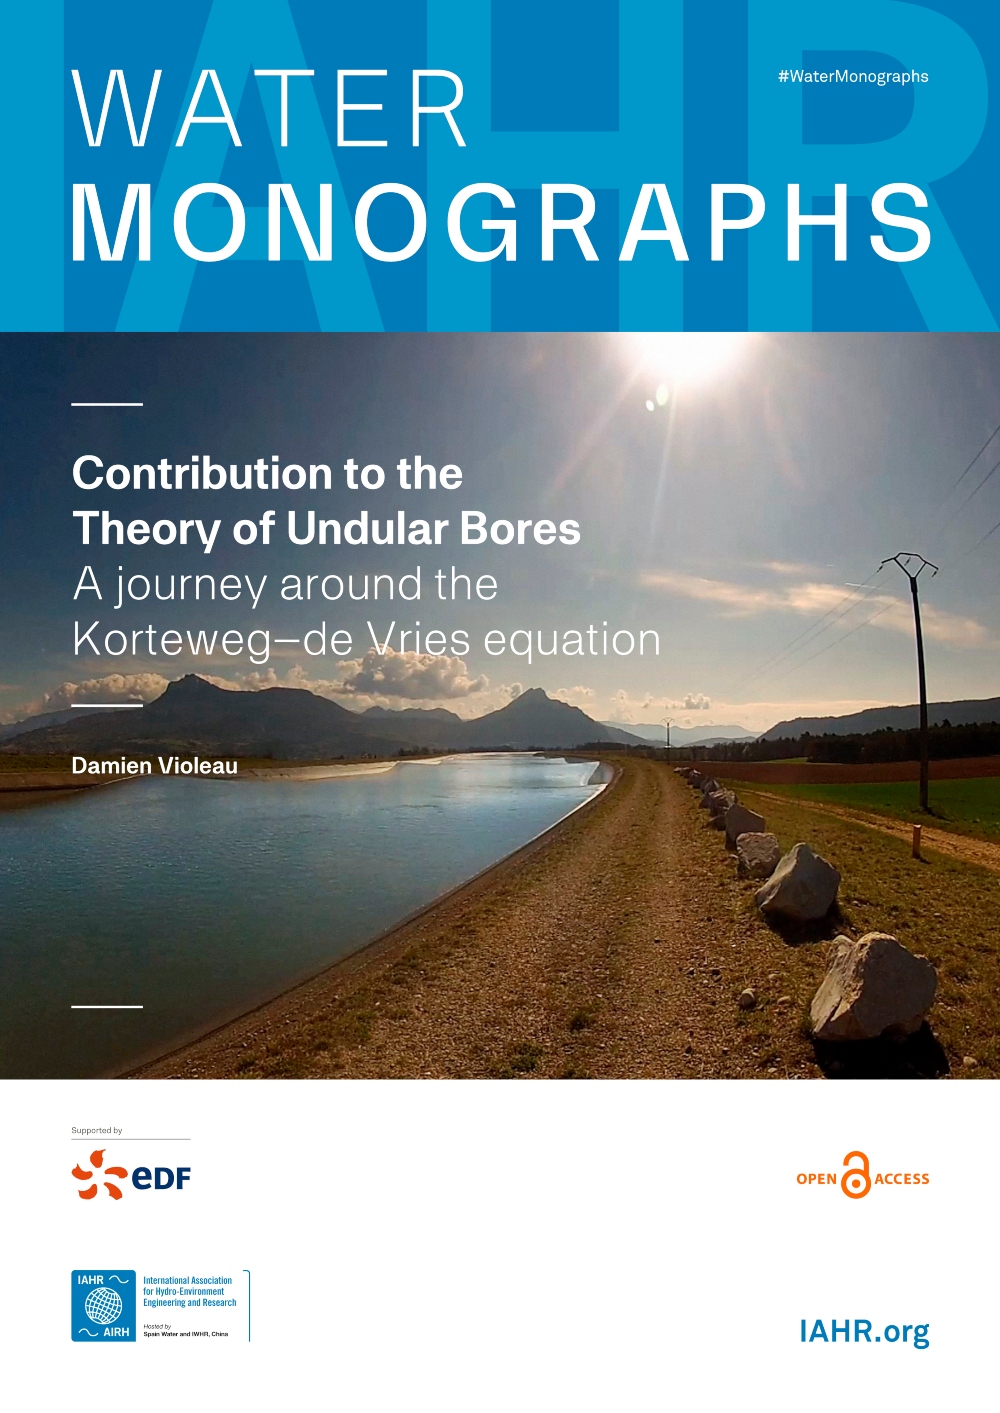 Water Monographs: Contribution to the Theory of Undular Bores. A journey around the Korteweg-de Vries equation